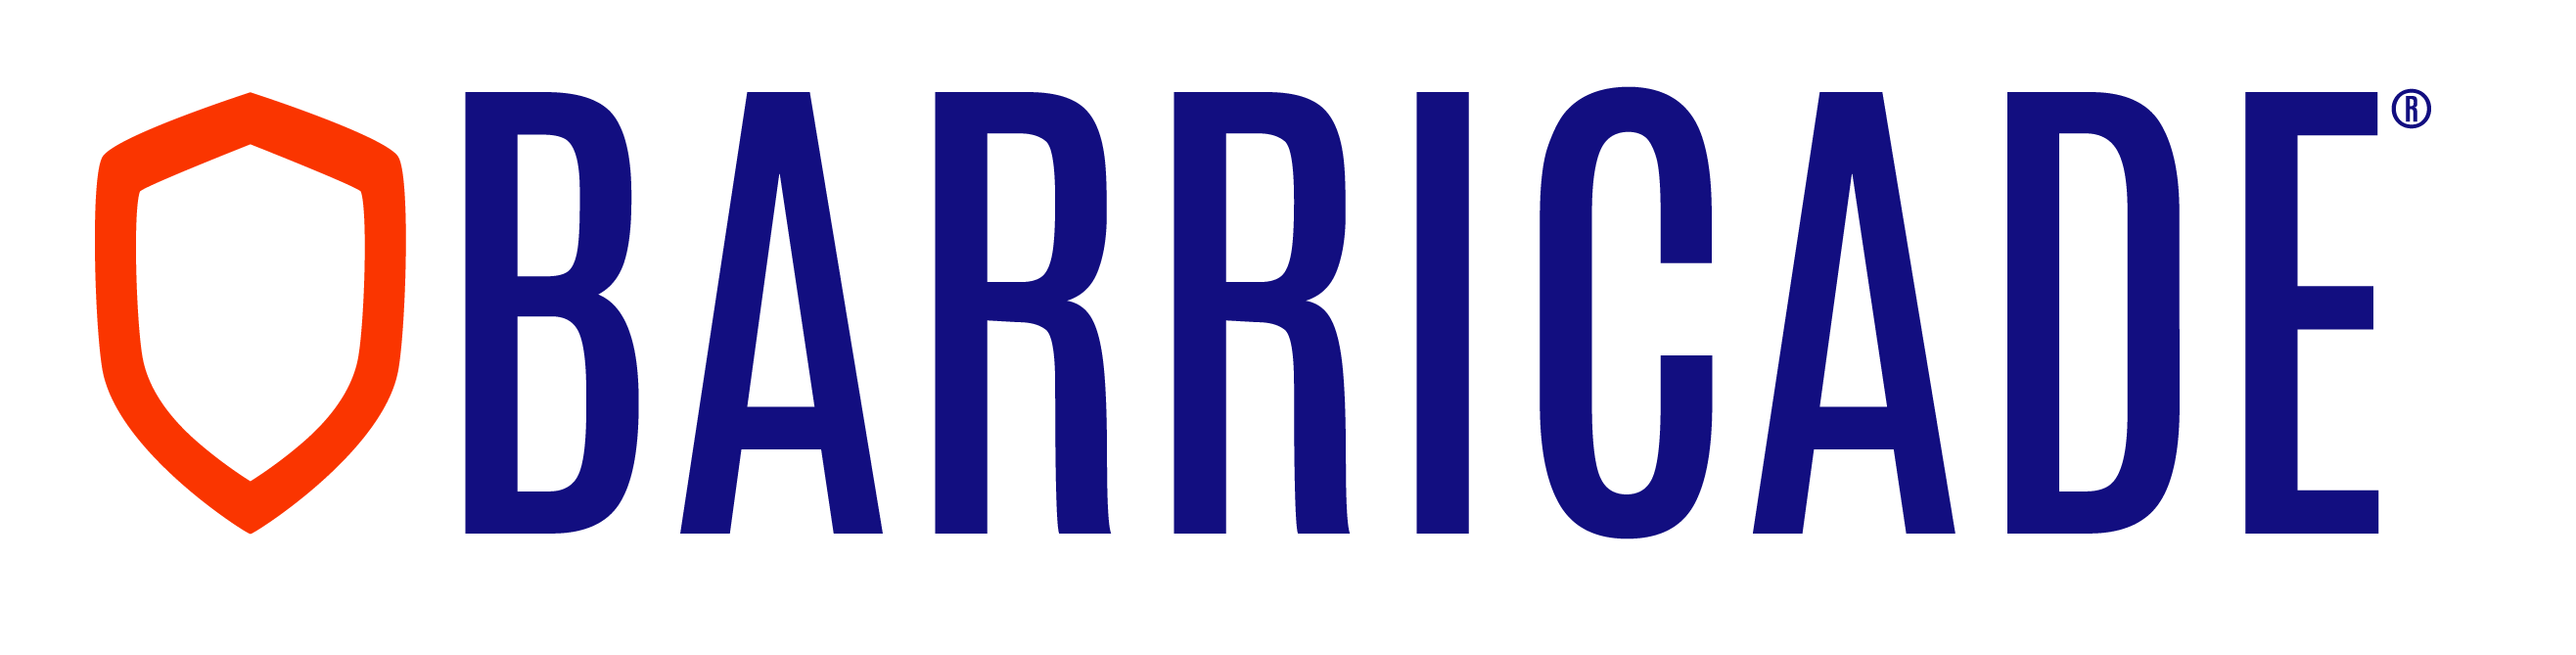 cropped-Barricade-Logo.png